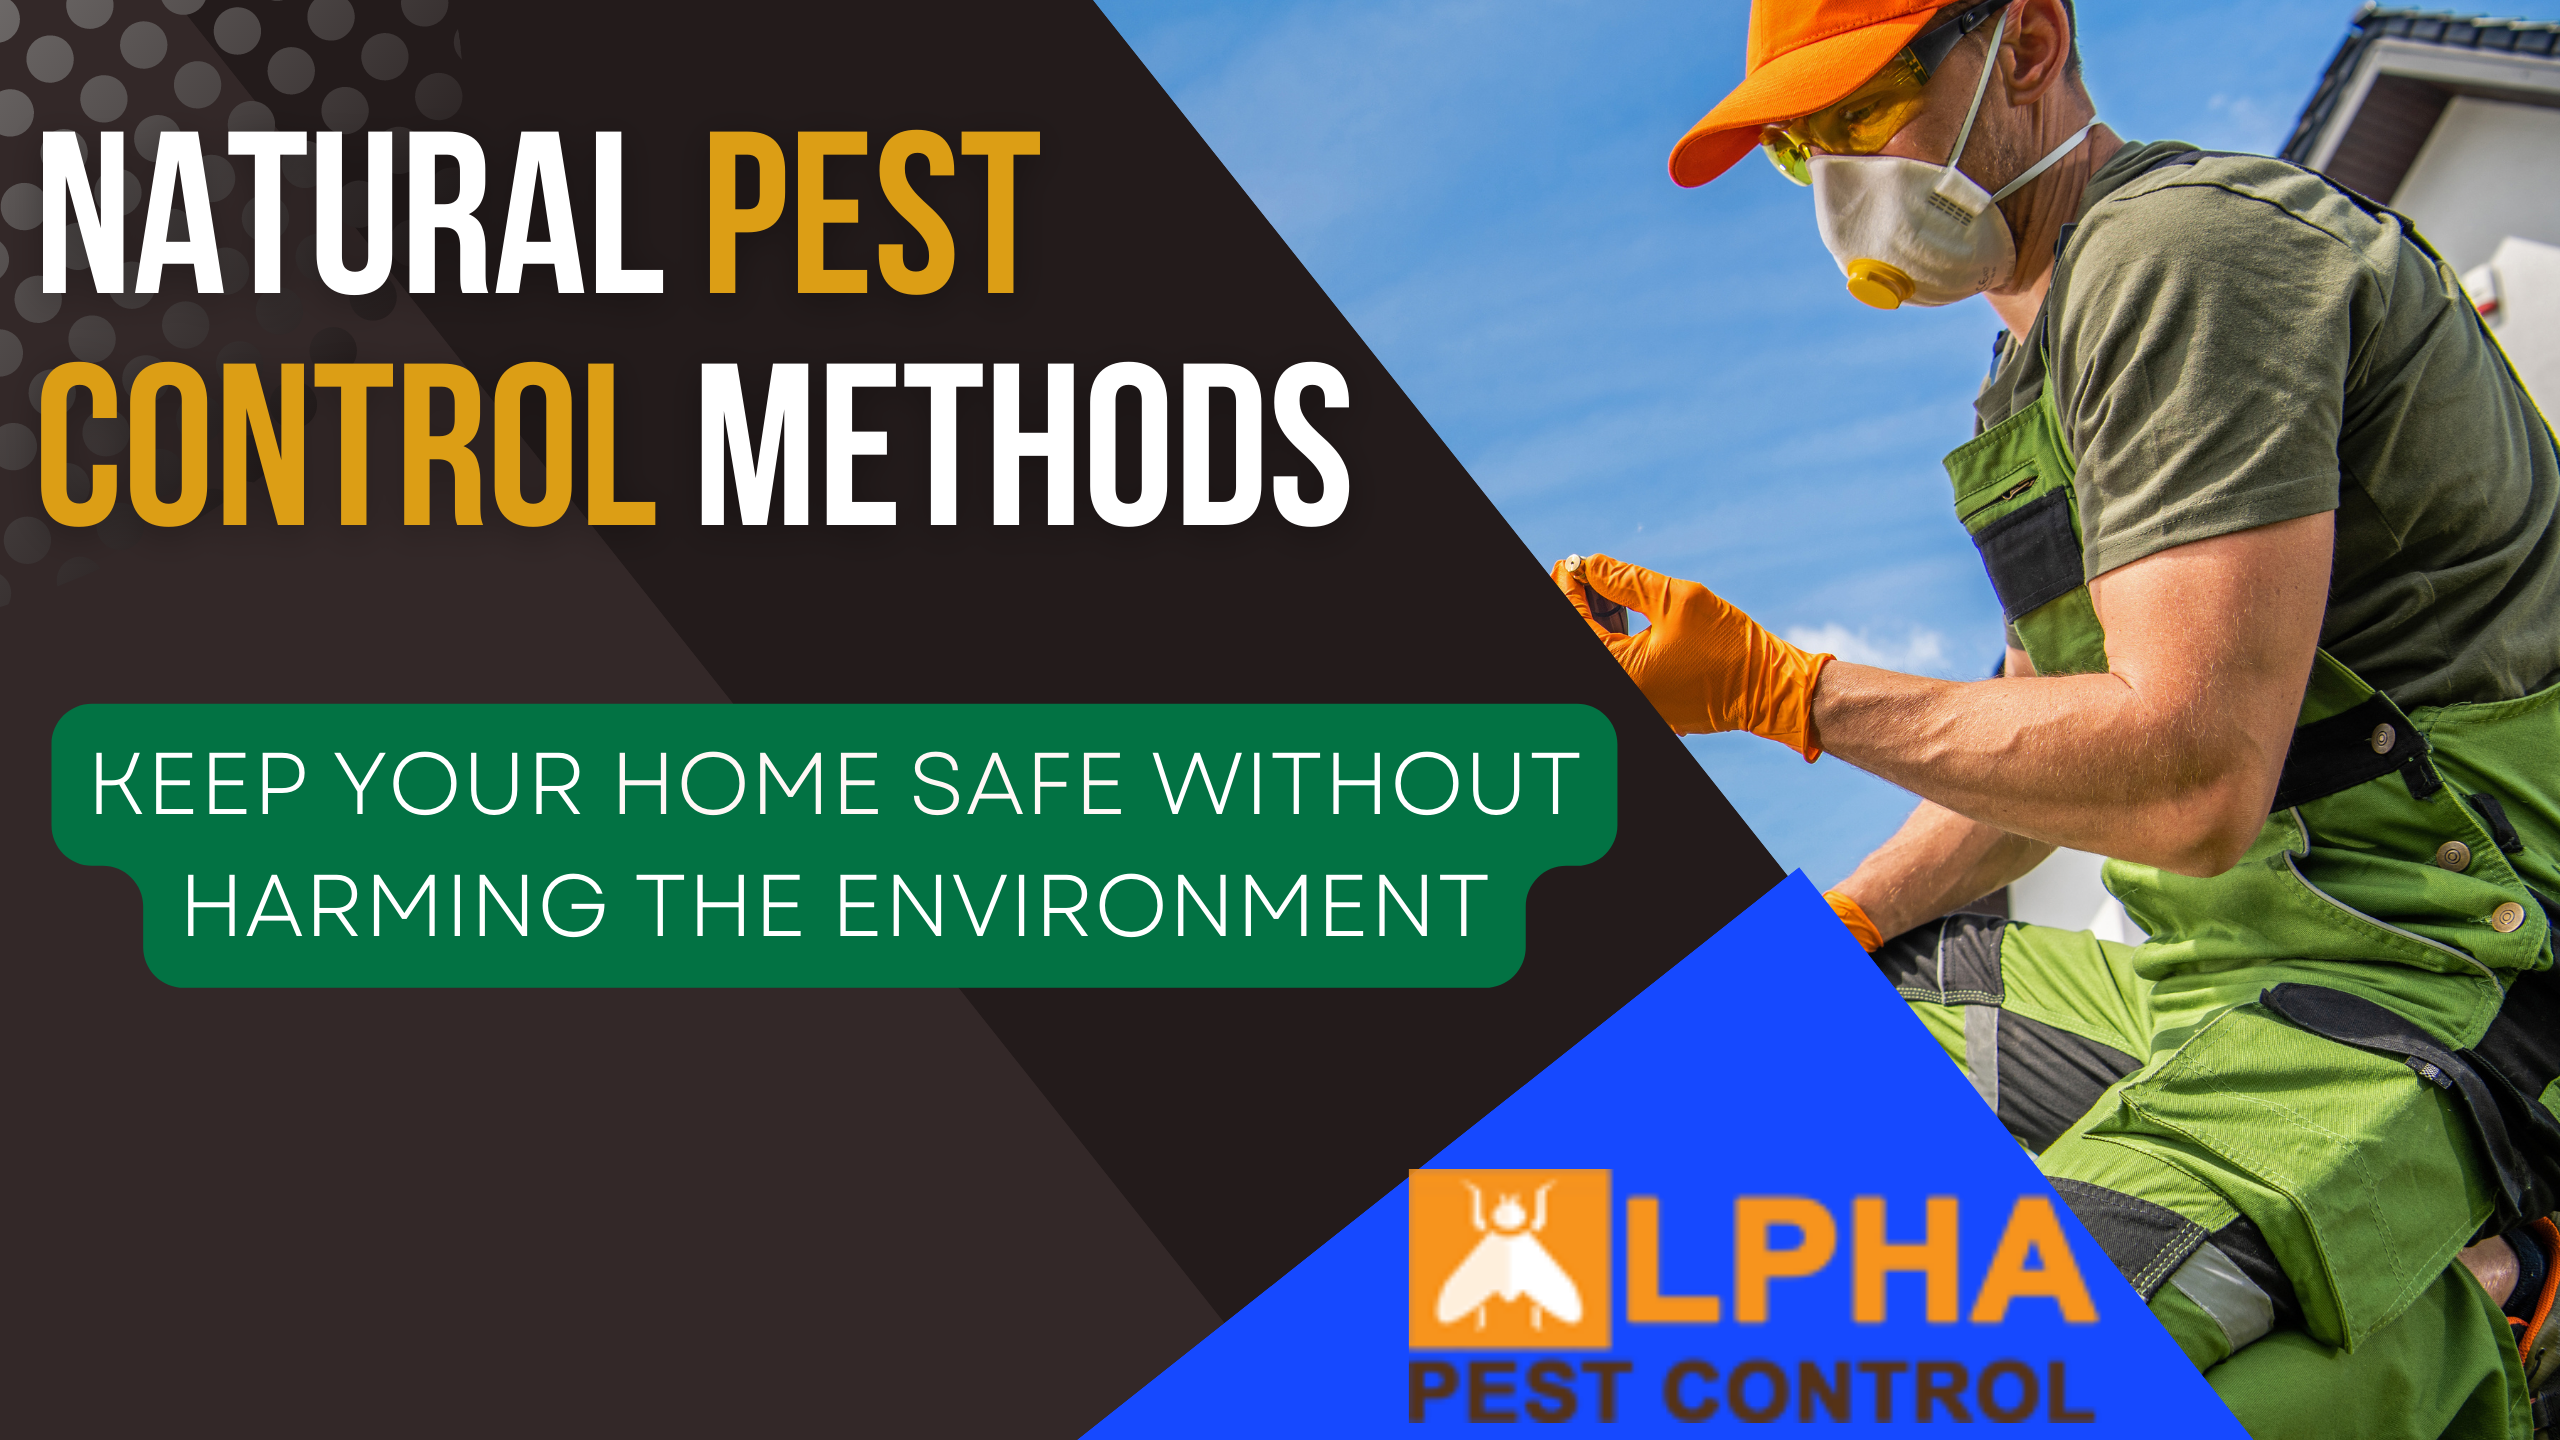 Natural Pest Control Methods: Keep Your Home Safe Without Harming the Environment